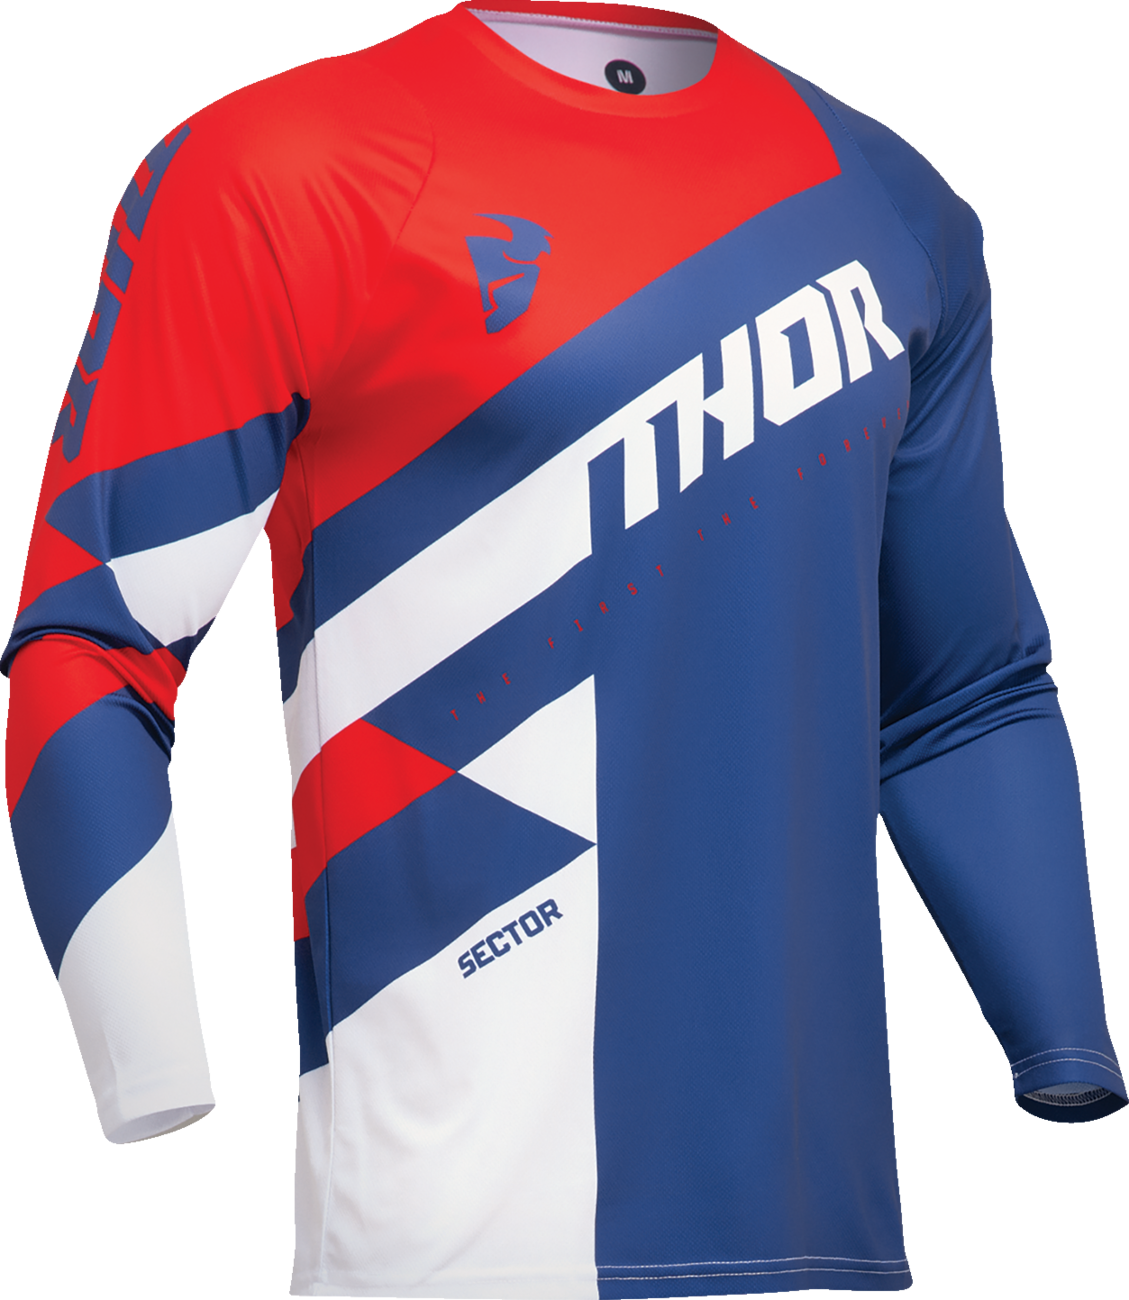 THOR Youth Sector Checker Jersey - Navy/Red - Large 2912-2428